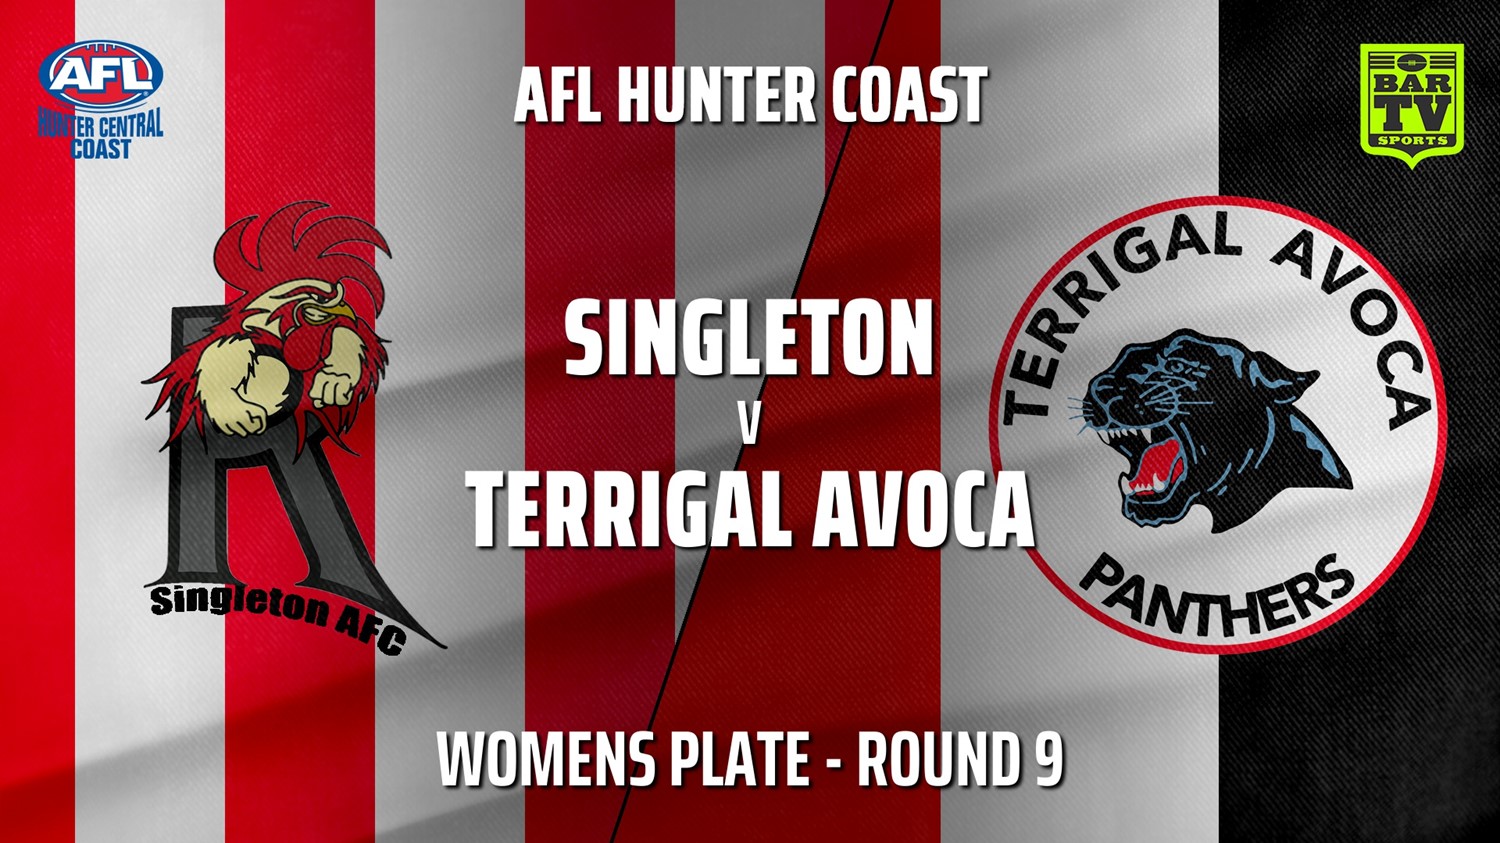 210619-AFL Hunter Central Coast Round 9 - Womens Plate - Singleton Roosters v Terrigal Avoca Panthers Minigame Slate Image